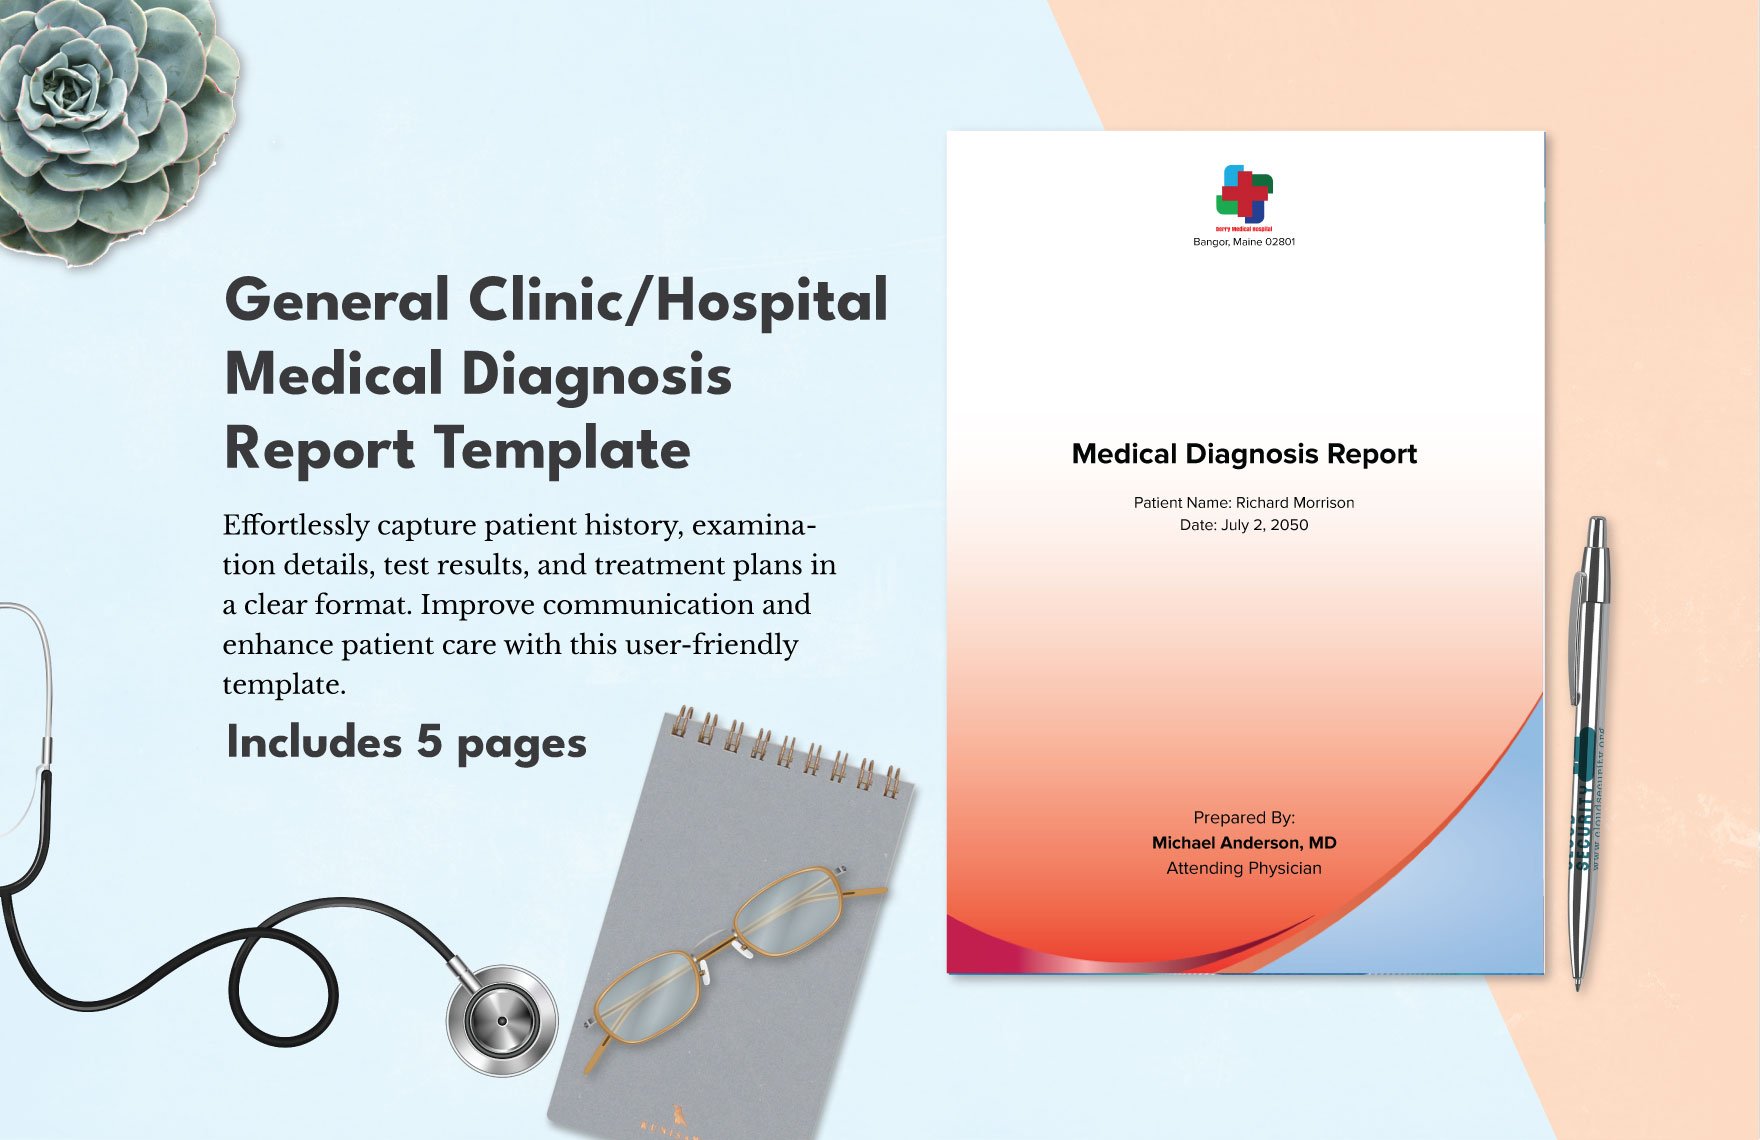 General Clinic/Hospital Medical Diagnosis Report Template